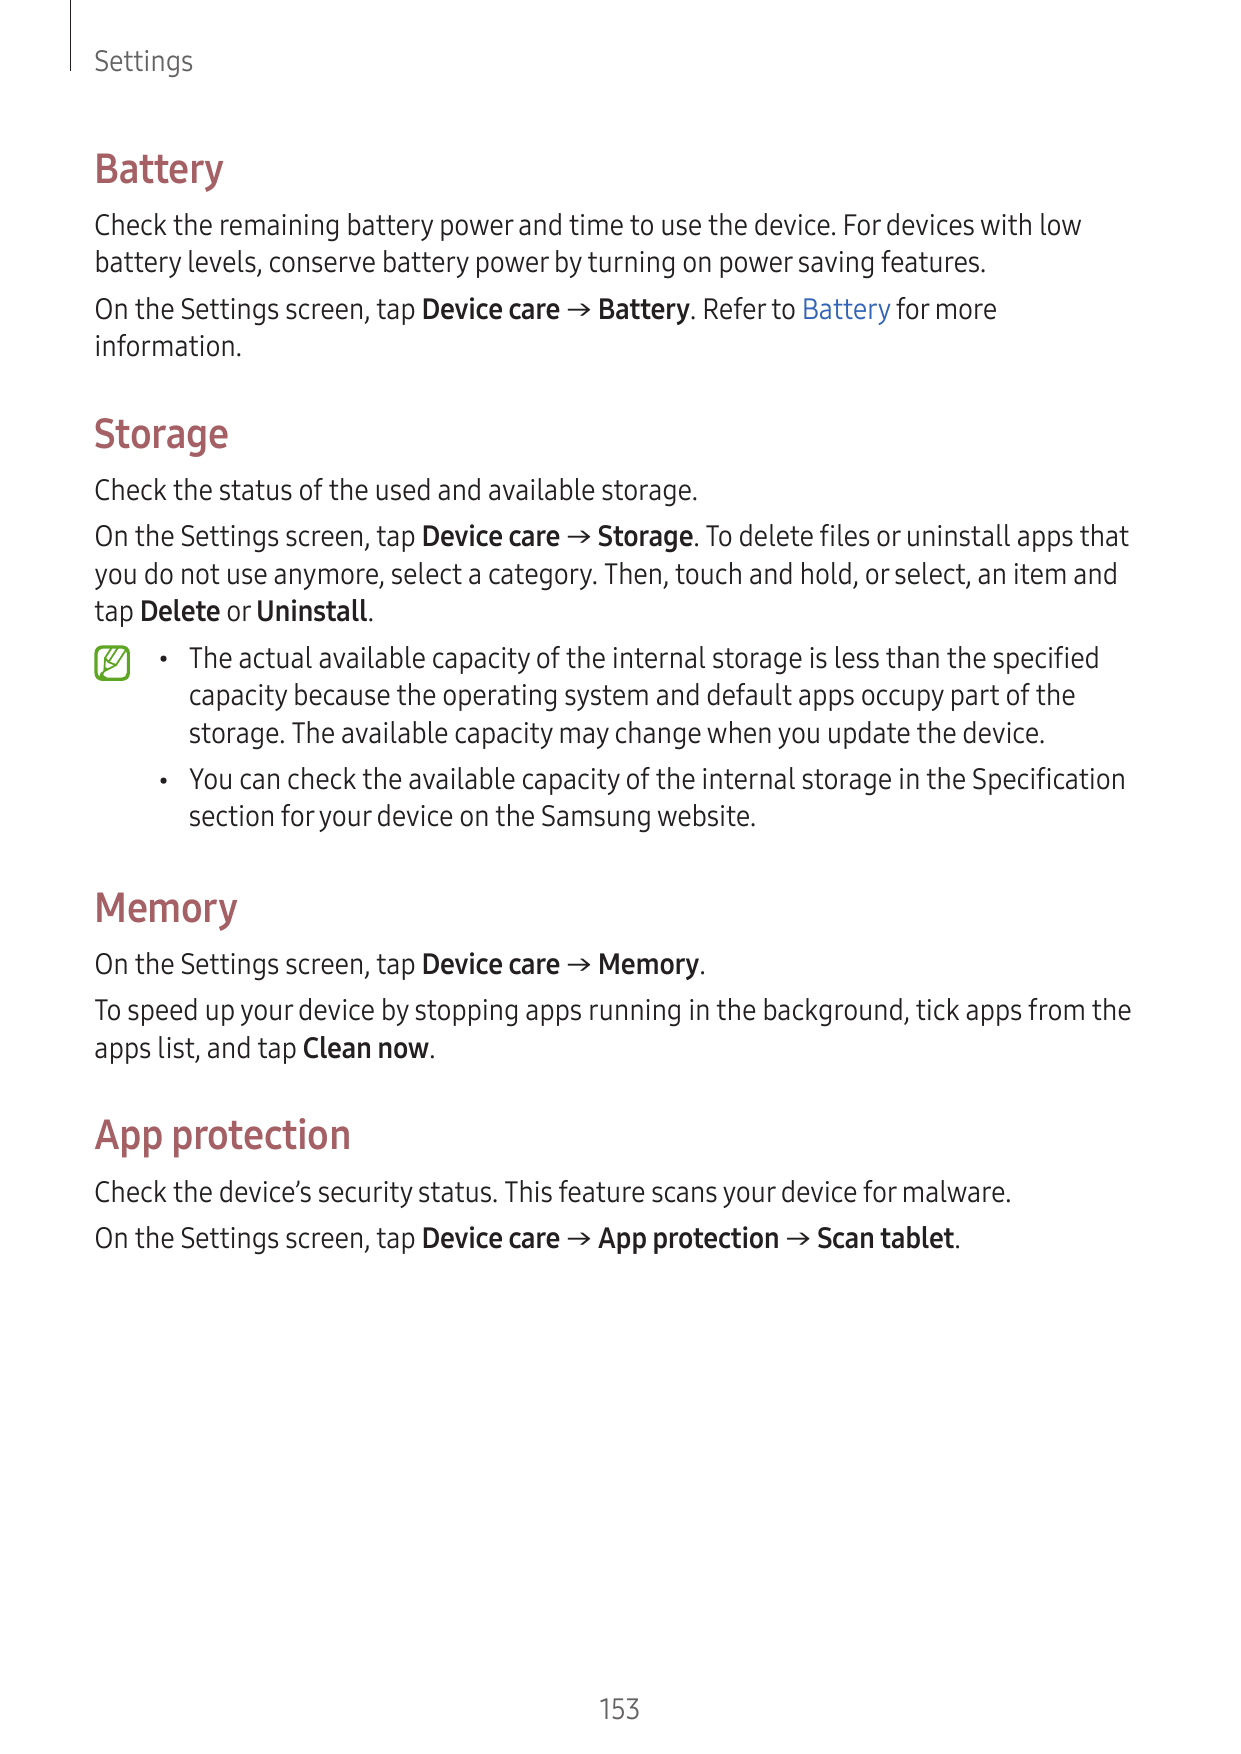 SettingsBatteryCheck the remaining battery power and time to use the device. For devices with lowbattery levels, conserve batter